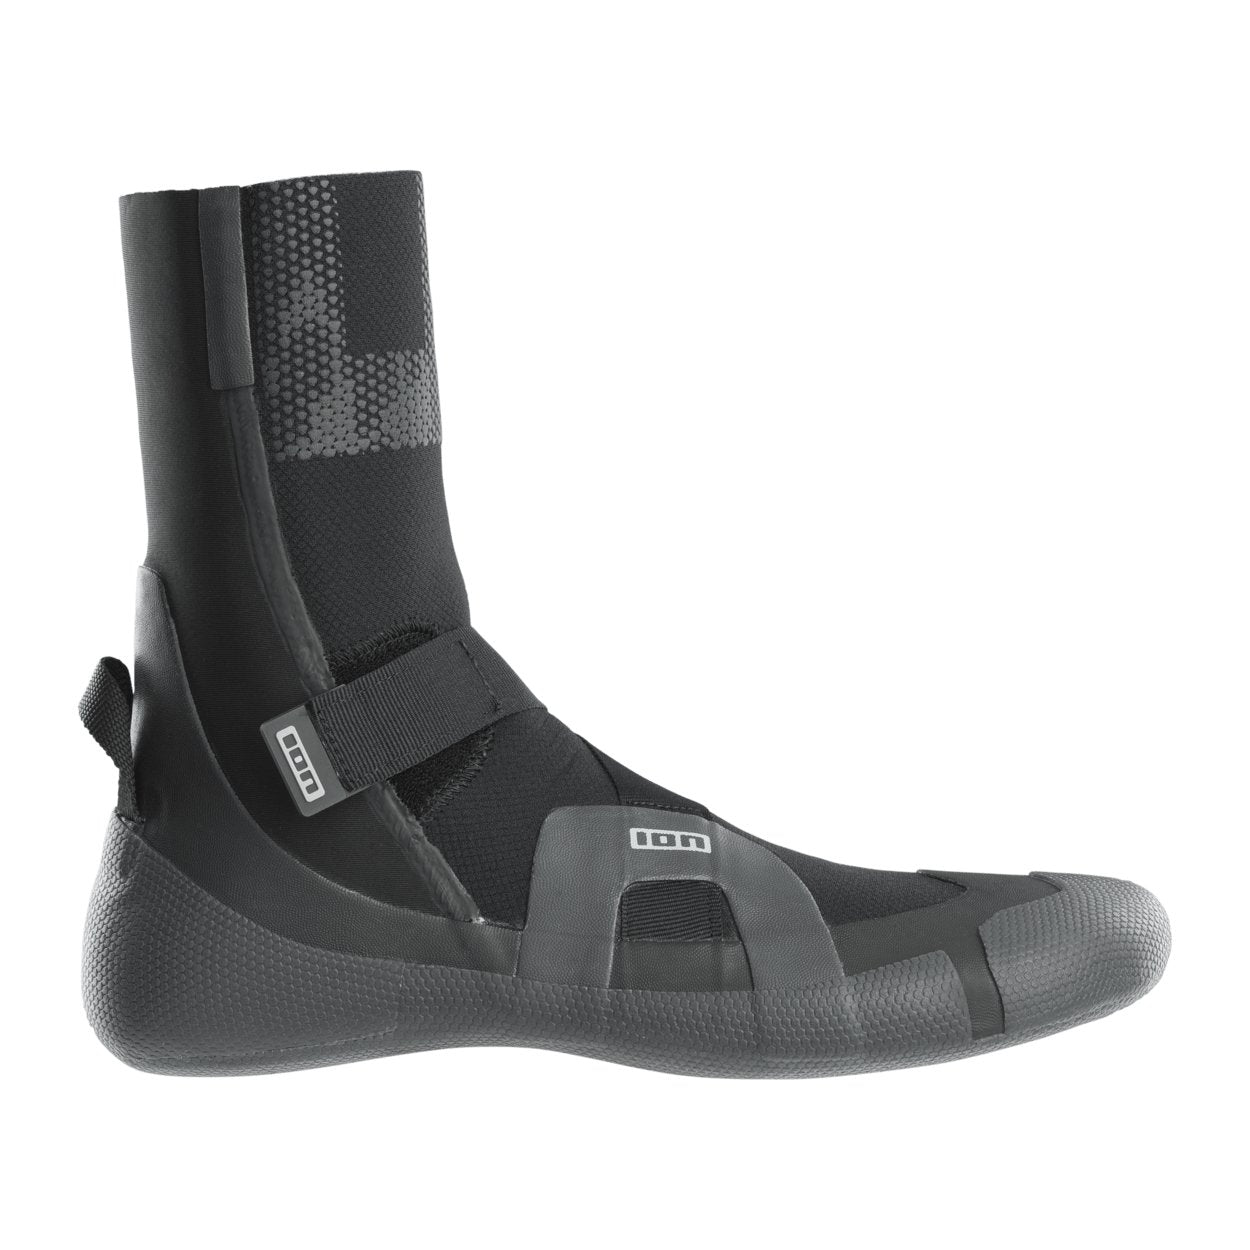 ION Ballistic Boots 3/2 Round Toe 2023 - Worthing Watersports - 9010583092300 - Footwear - ION Water